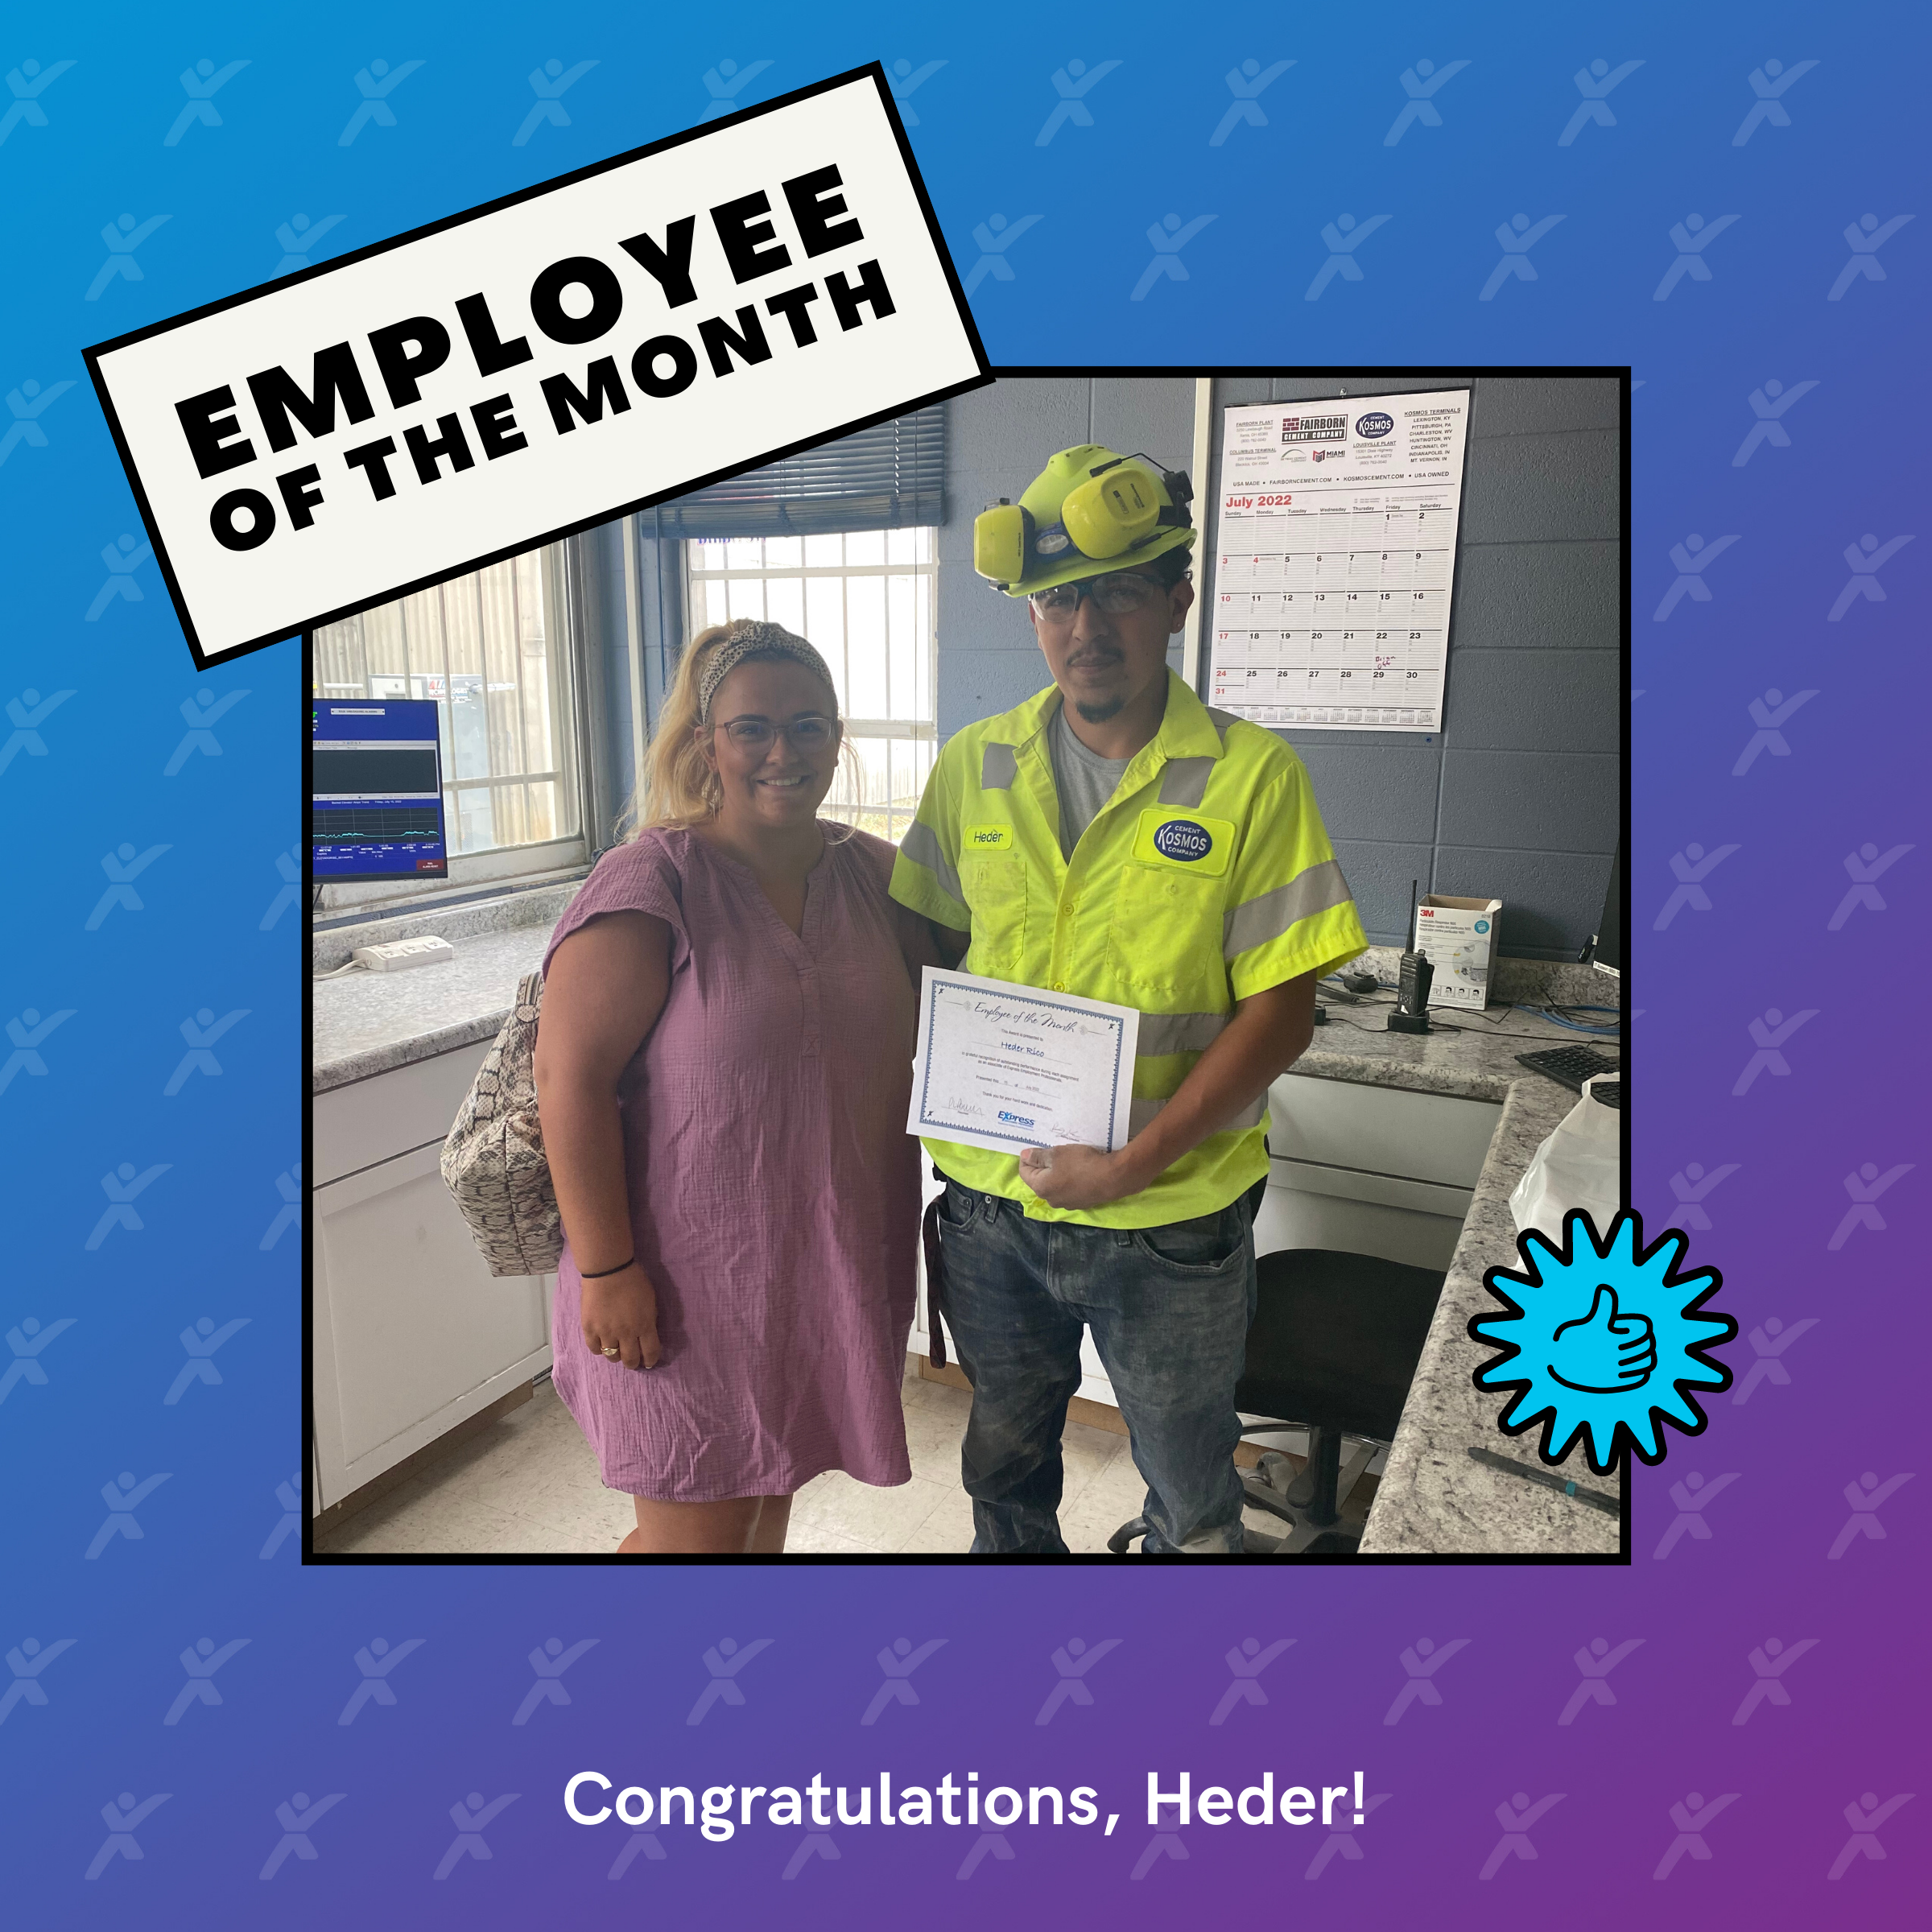 Employee of the Month - Heder